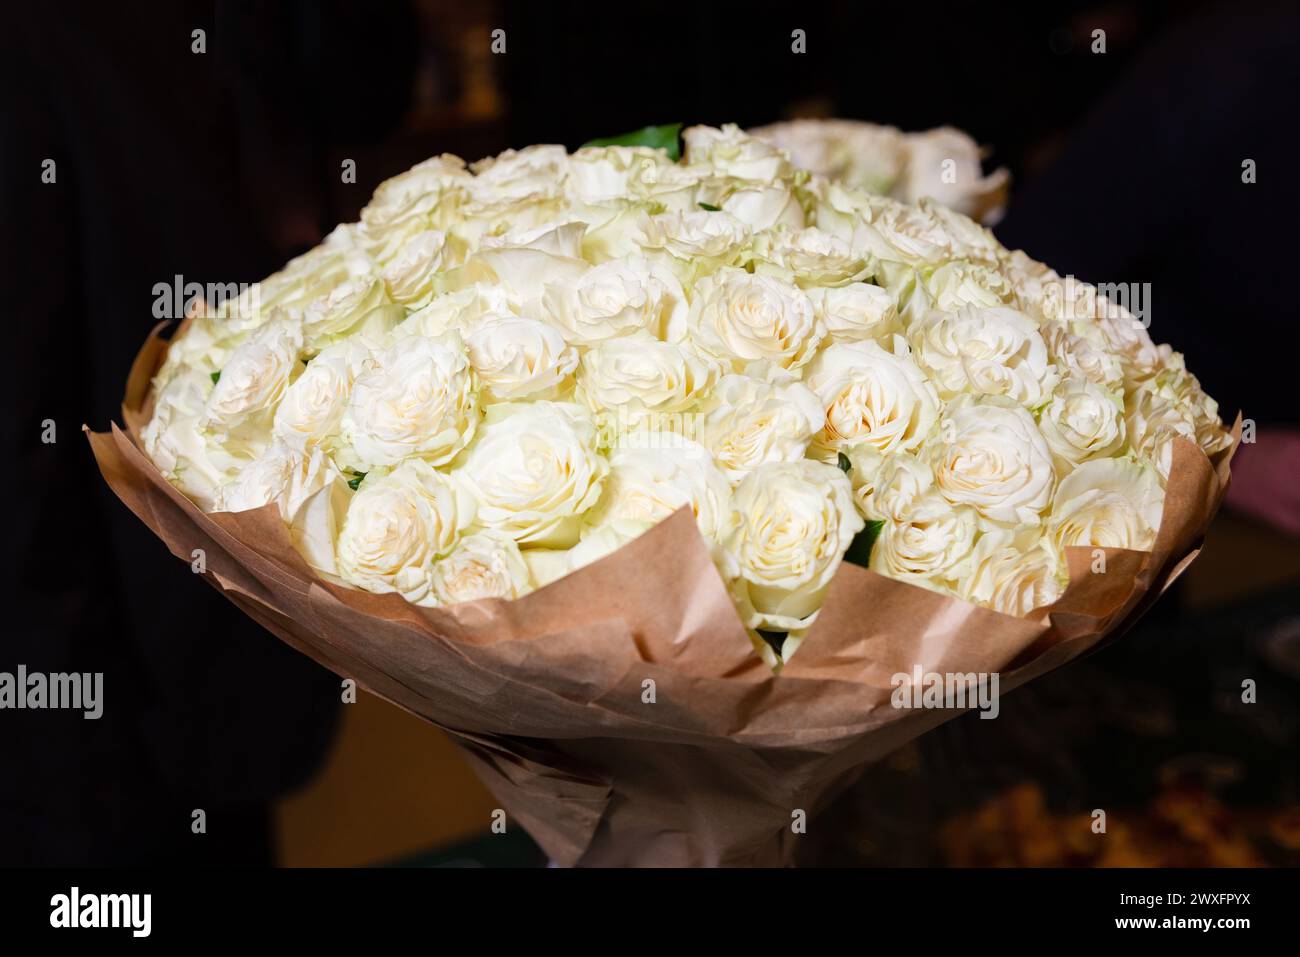 A stunning, large bouquet of fresh white roses wrapped in craft paper, perfect for special occasions or as a gift. Stock Photo